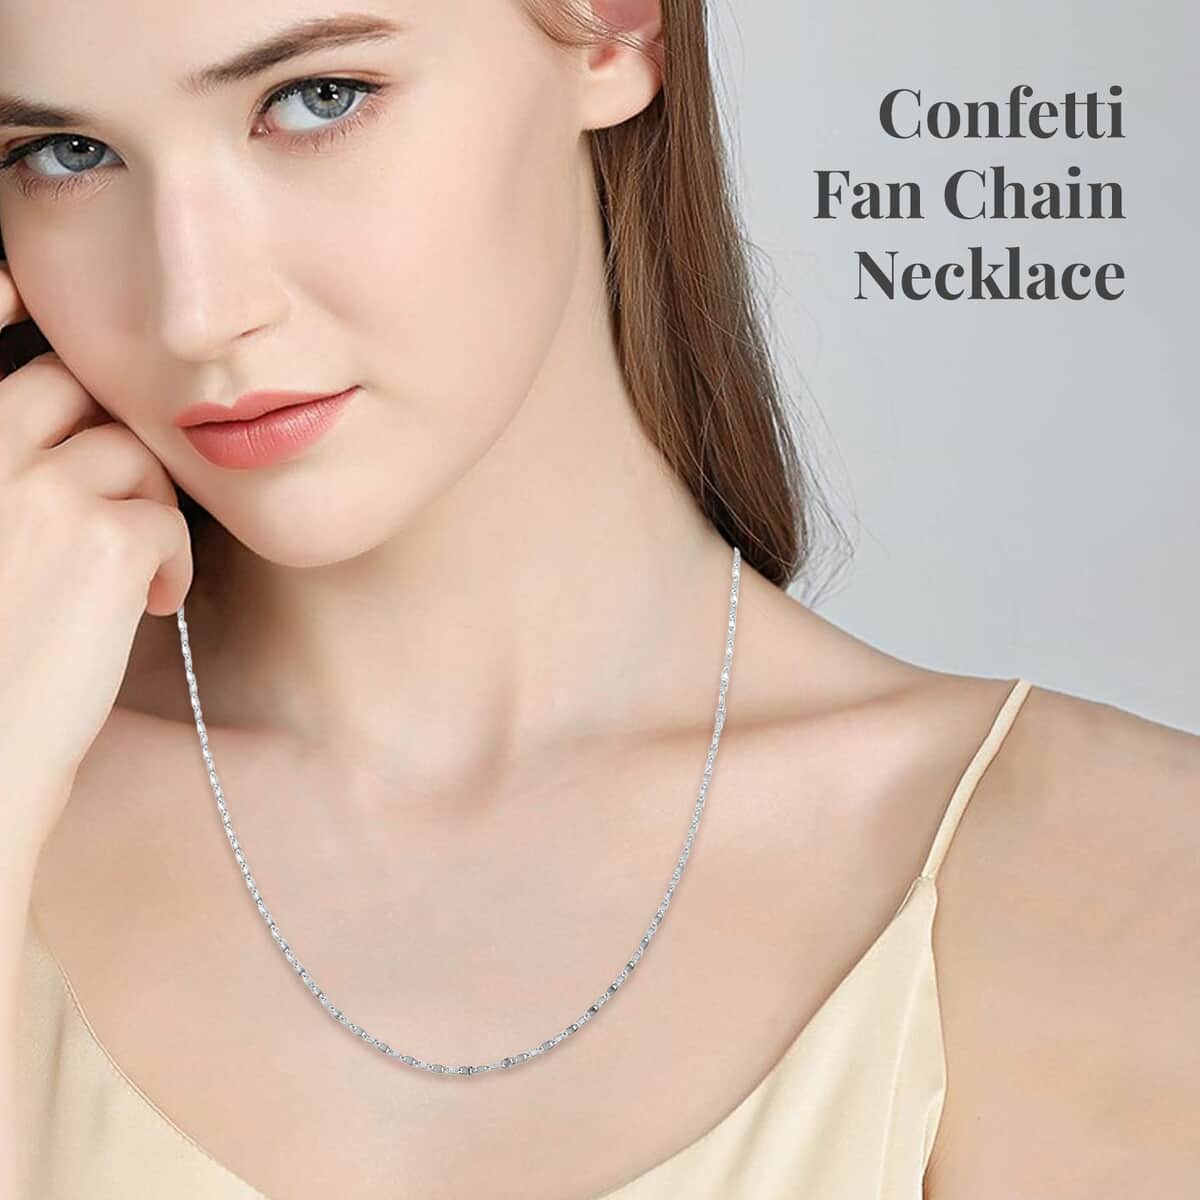 Italian Sterling Silver Confetti Fan Chain Necklace 20 Inches 3.50 Grams image number 2